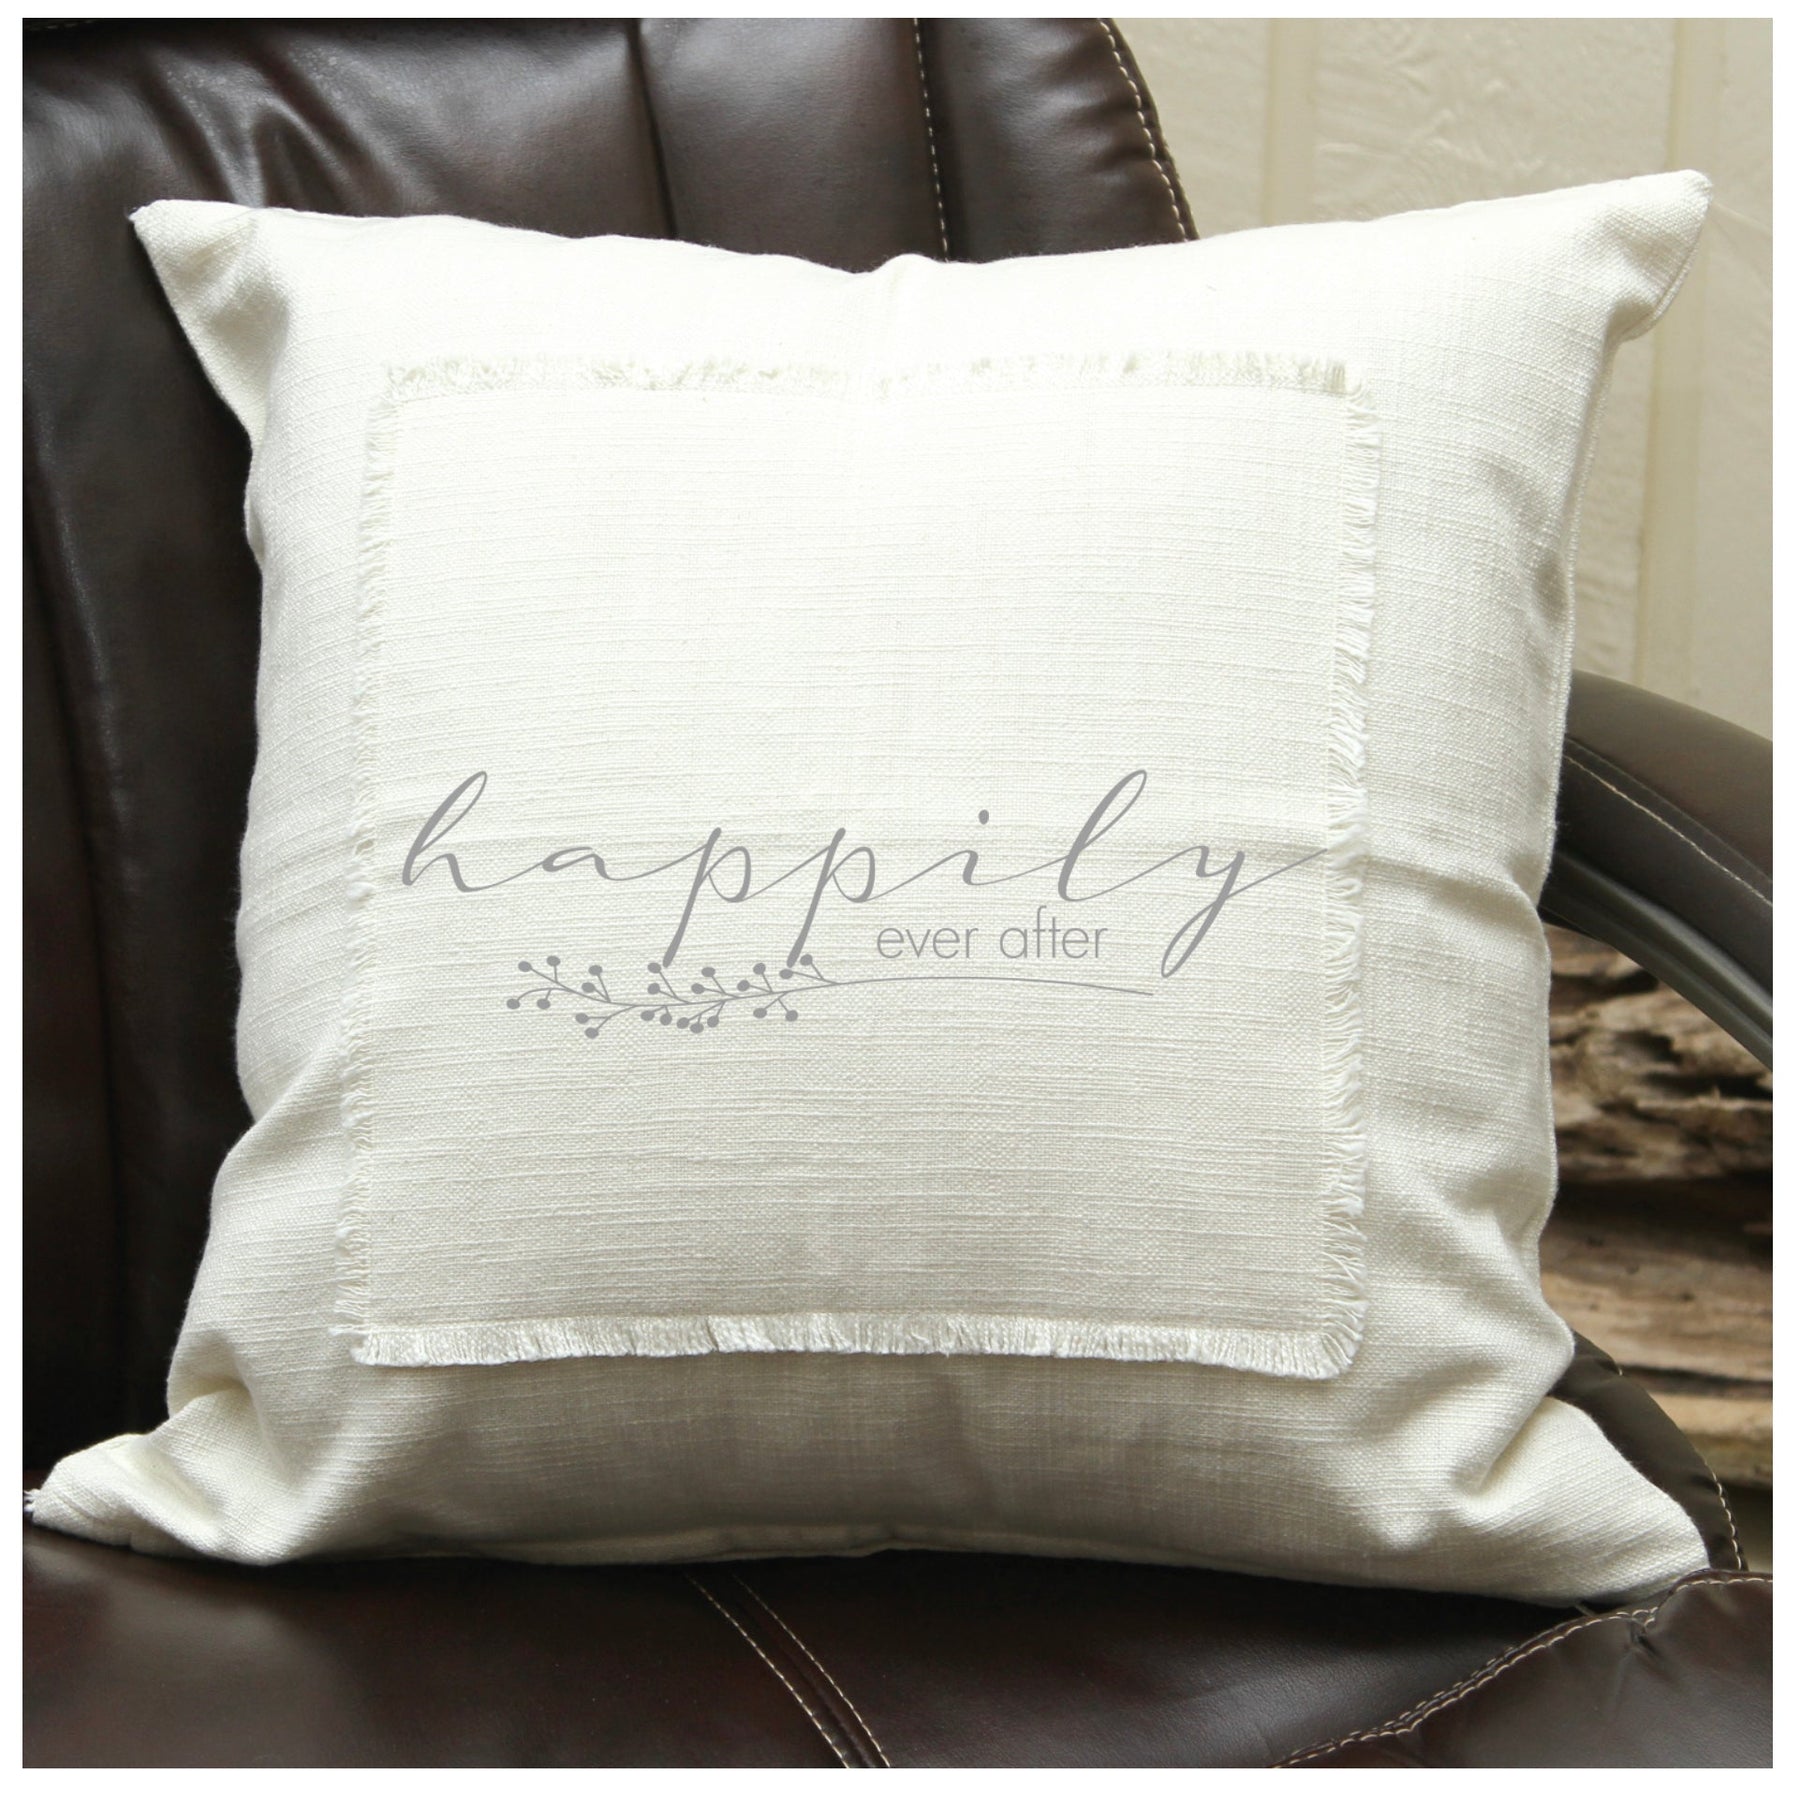 Happily ever after Pillow